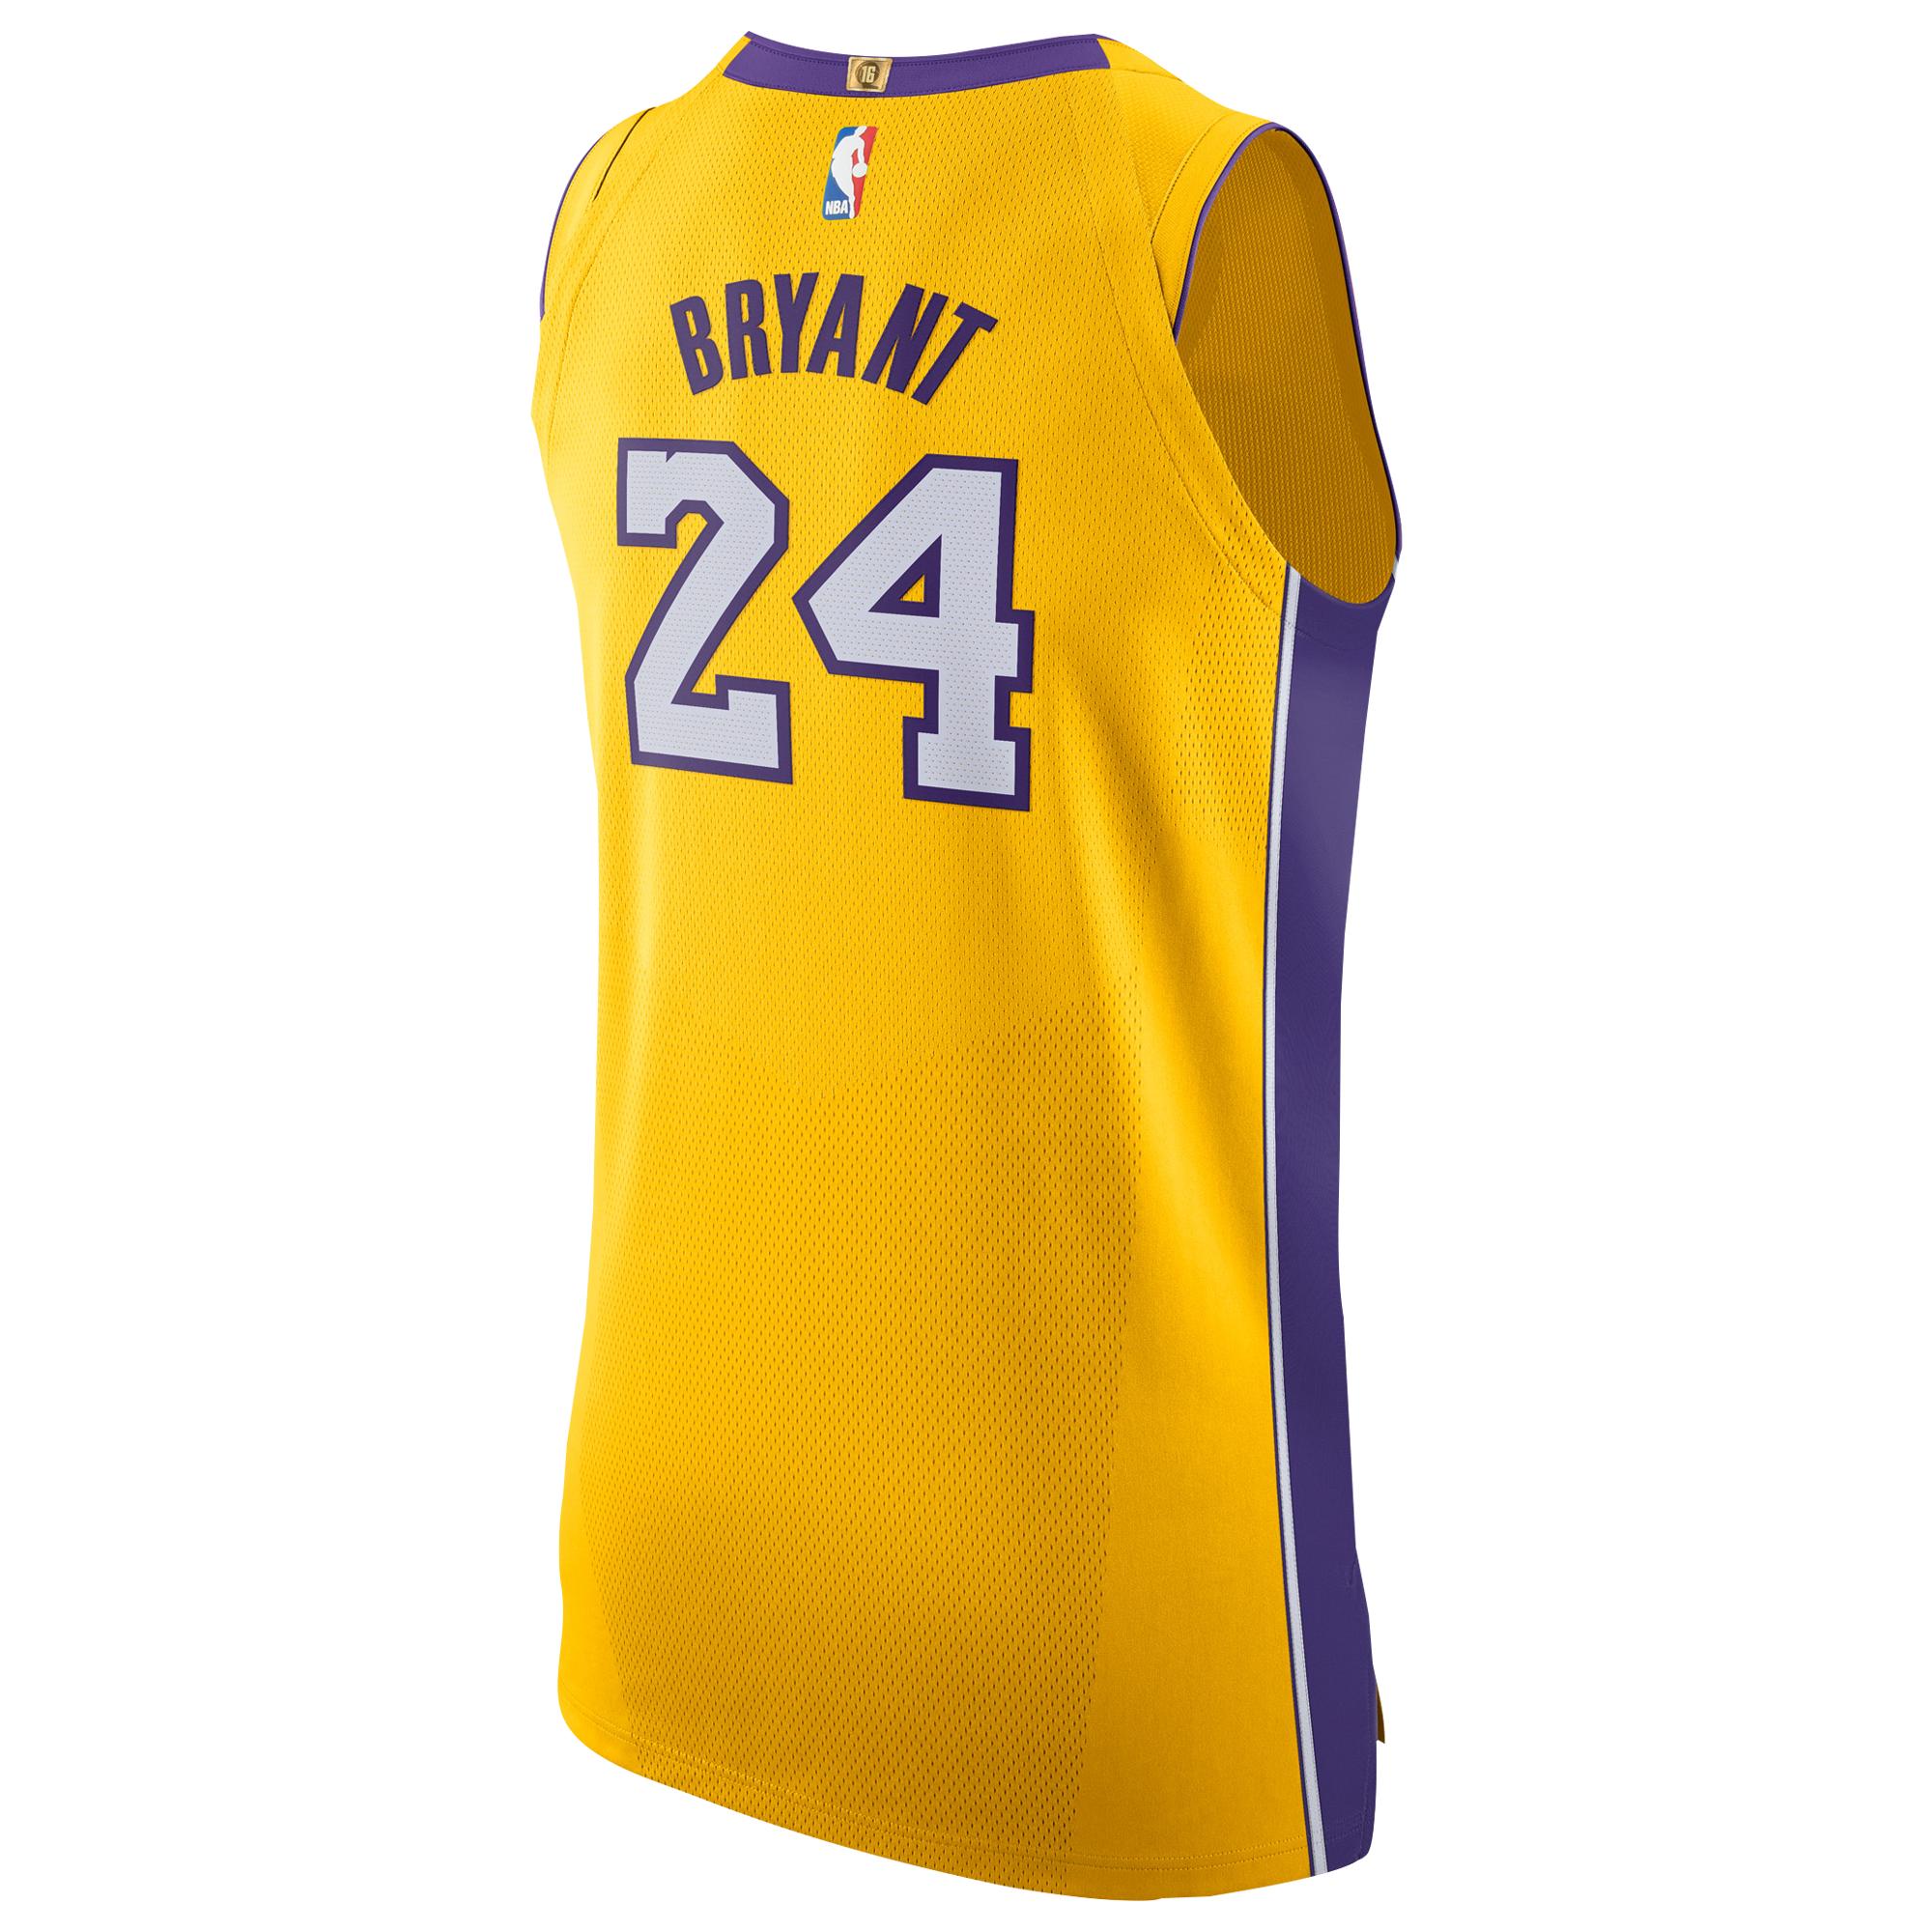 Nike Synthetic Kobe Bryant Nba Authentic Jersey in Yellow for Men ...